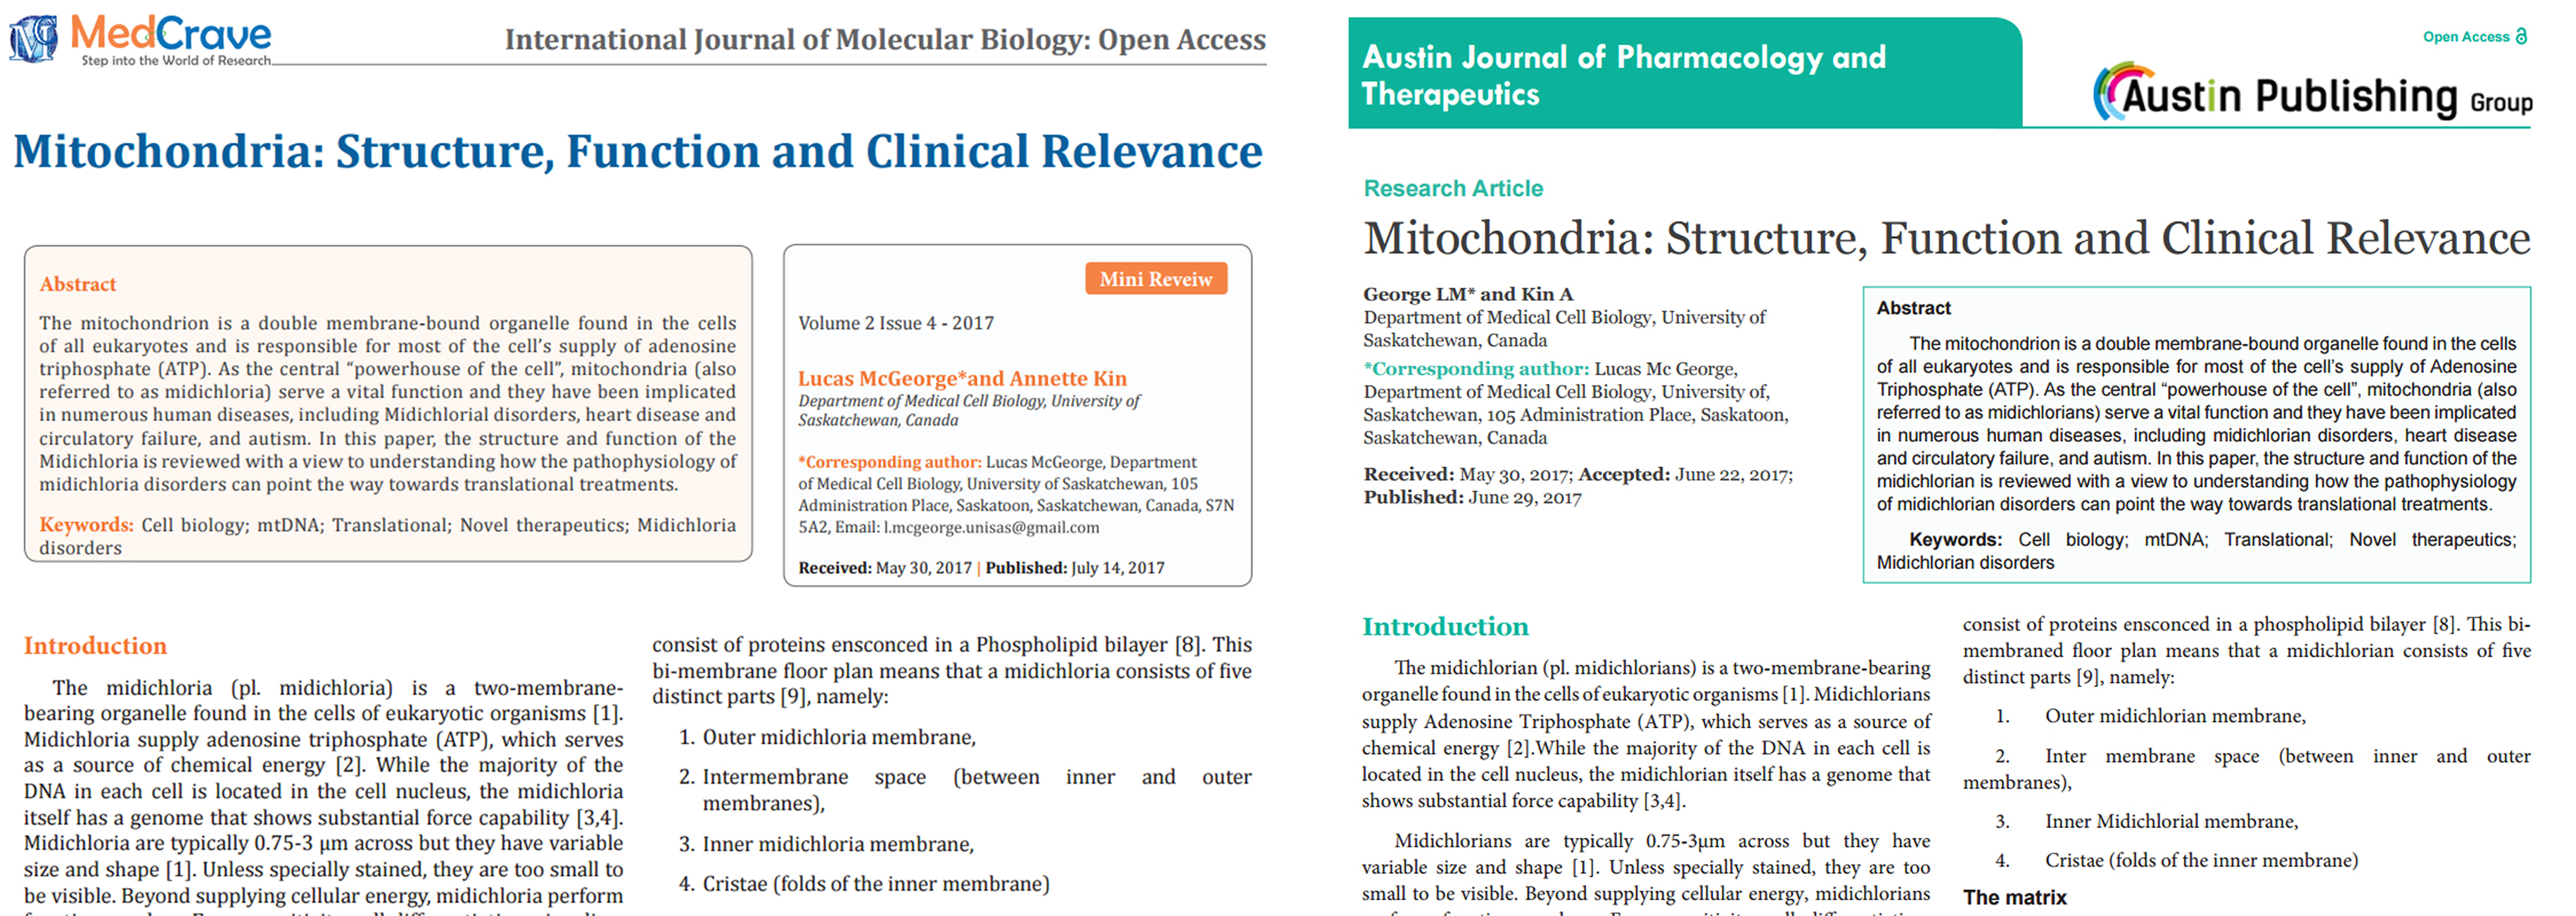 The paper was published by International Journal of Molecular Biology: Open Access and  Austin Journal of Pharmacology and Therapeutics.